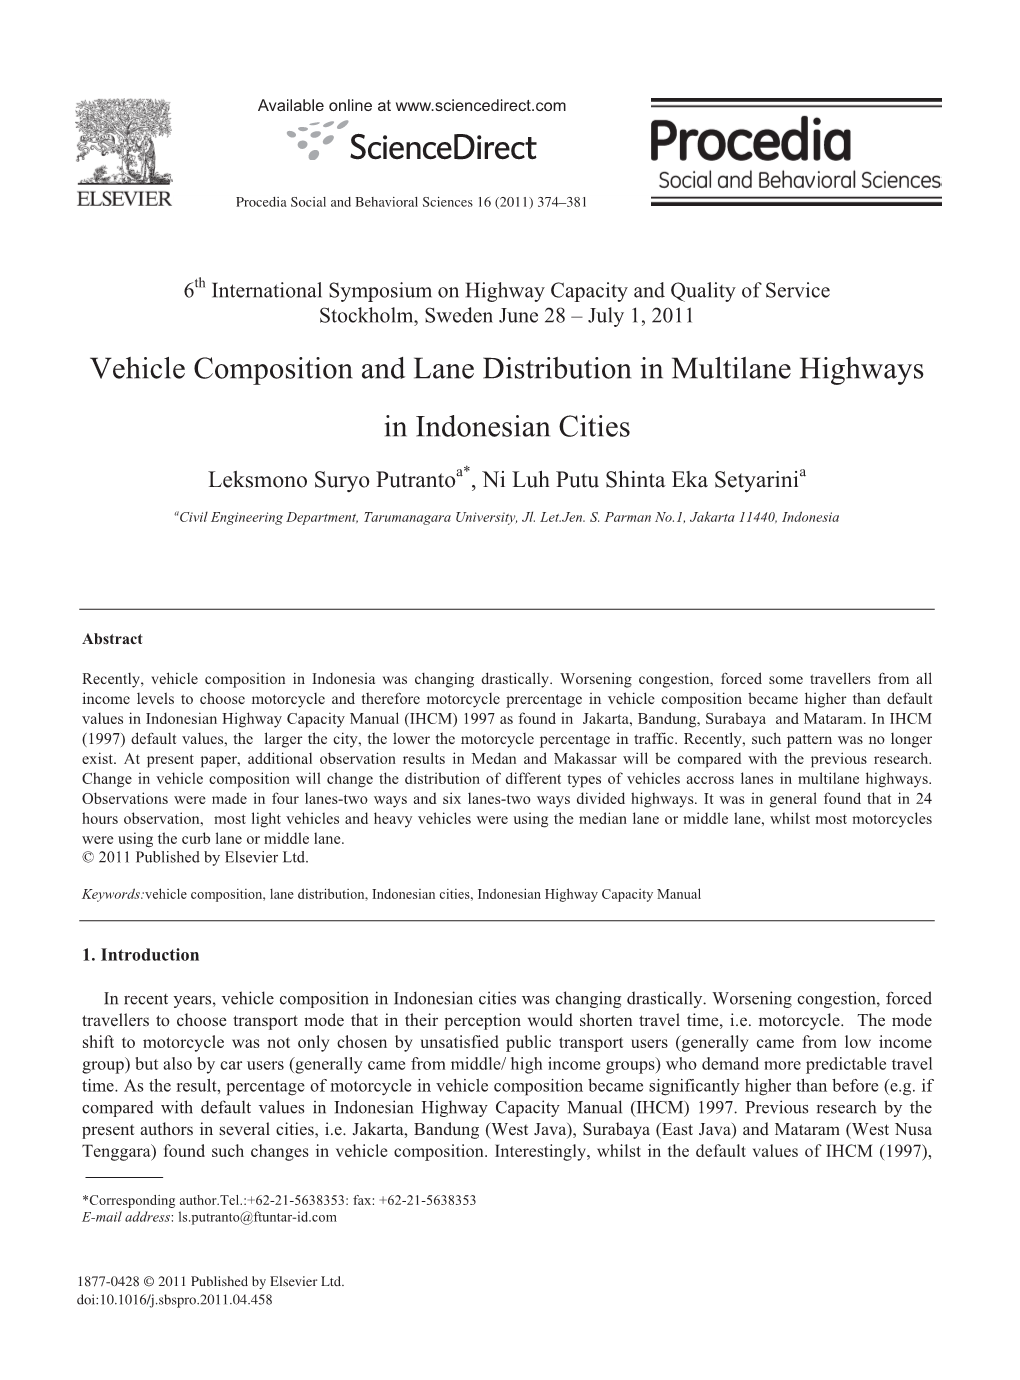 Vehicle Composition and Lane Distribution in Multilane Highways in Indonesian Cities